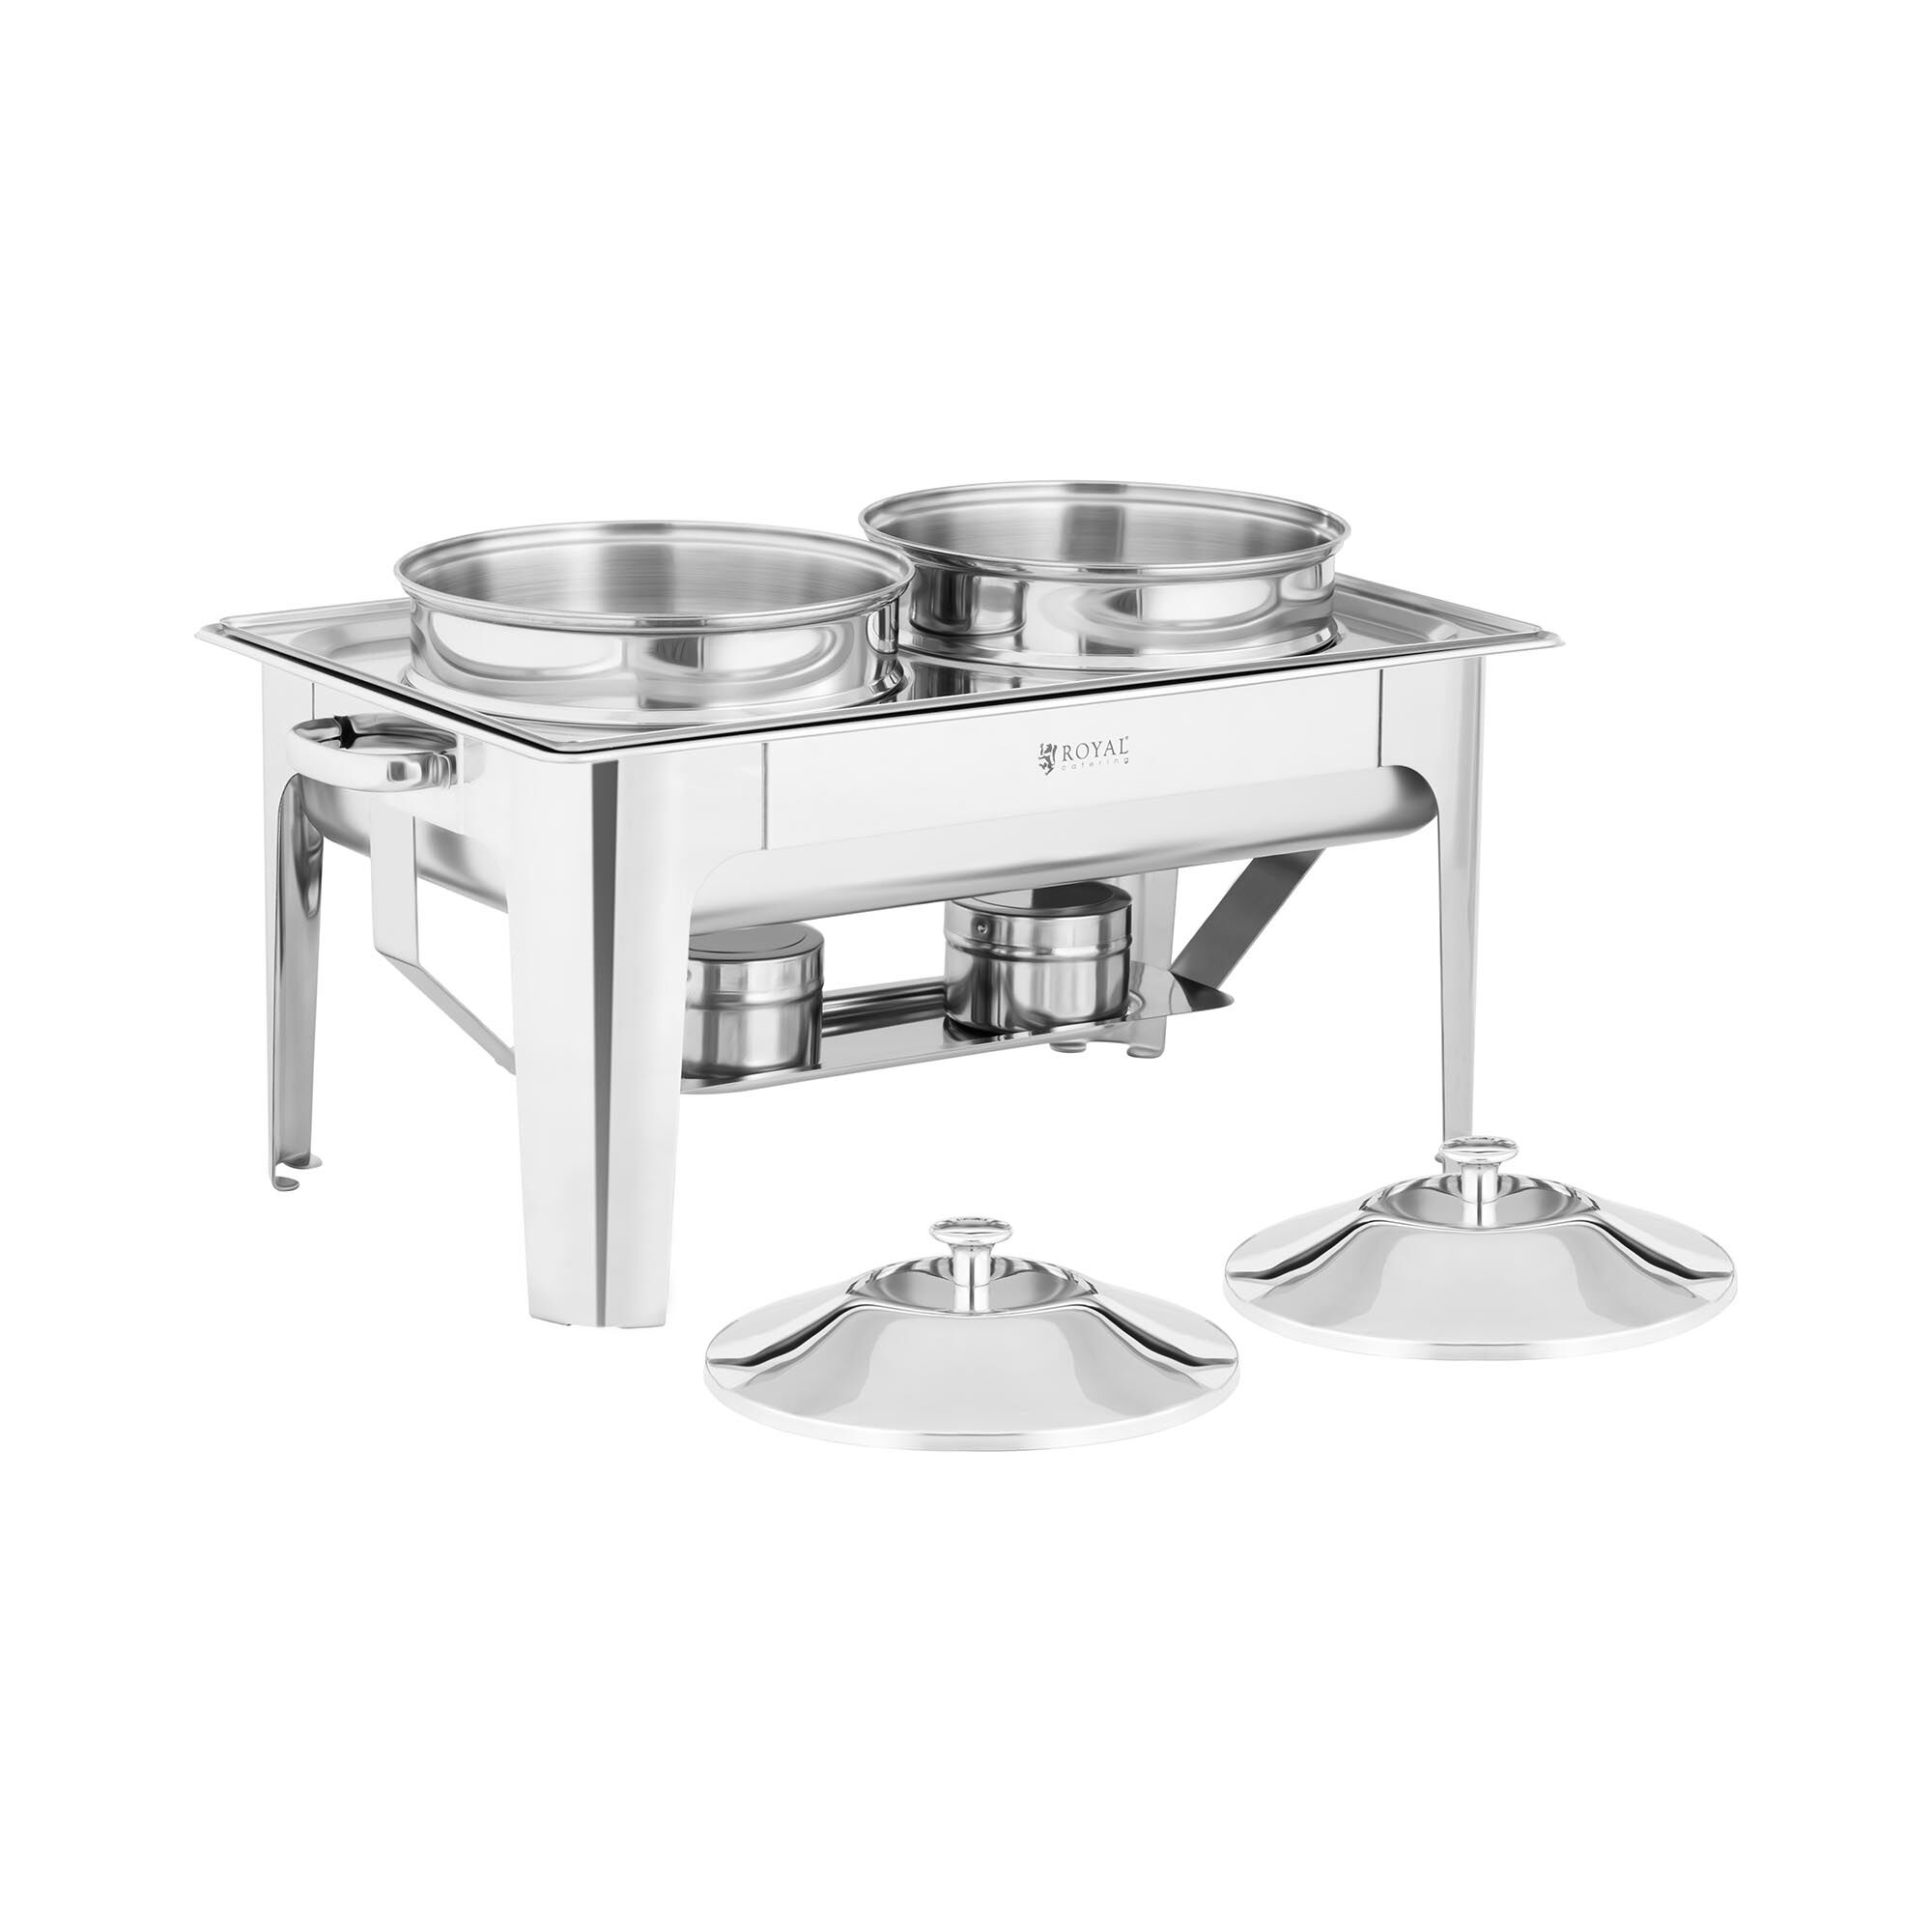 Royal Catering Chafing Dish - 2 x GN 1/2 - 2 x 4,5 L - 2 Brennstoffzellen - Royal Catering